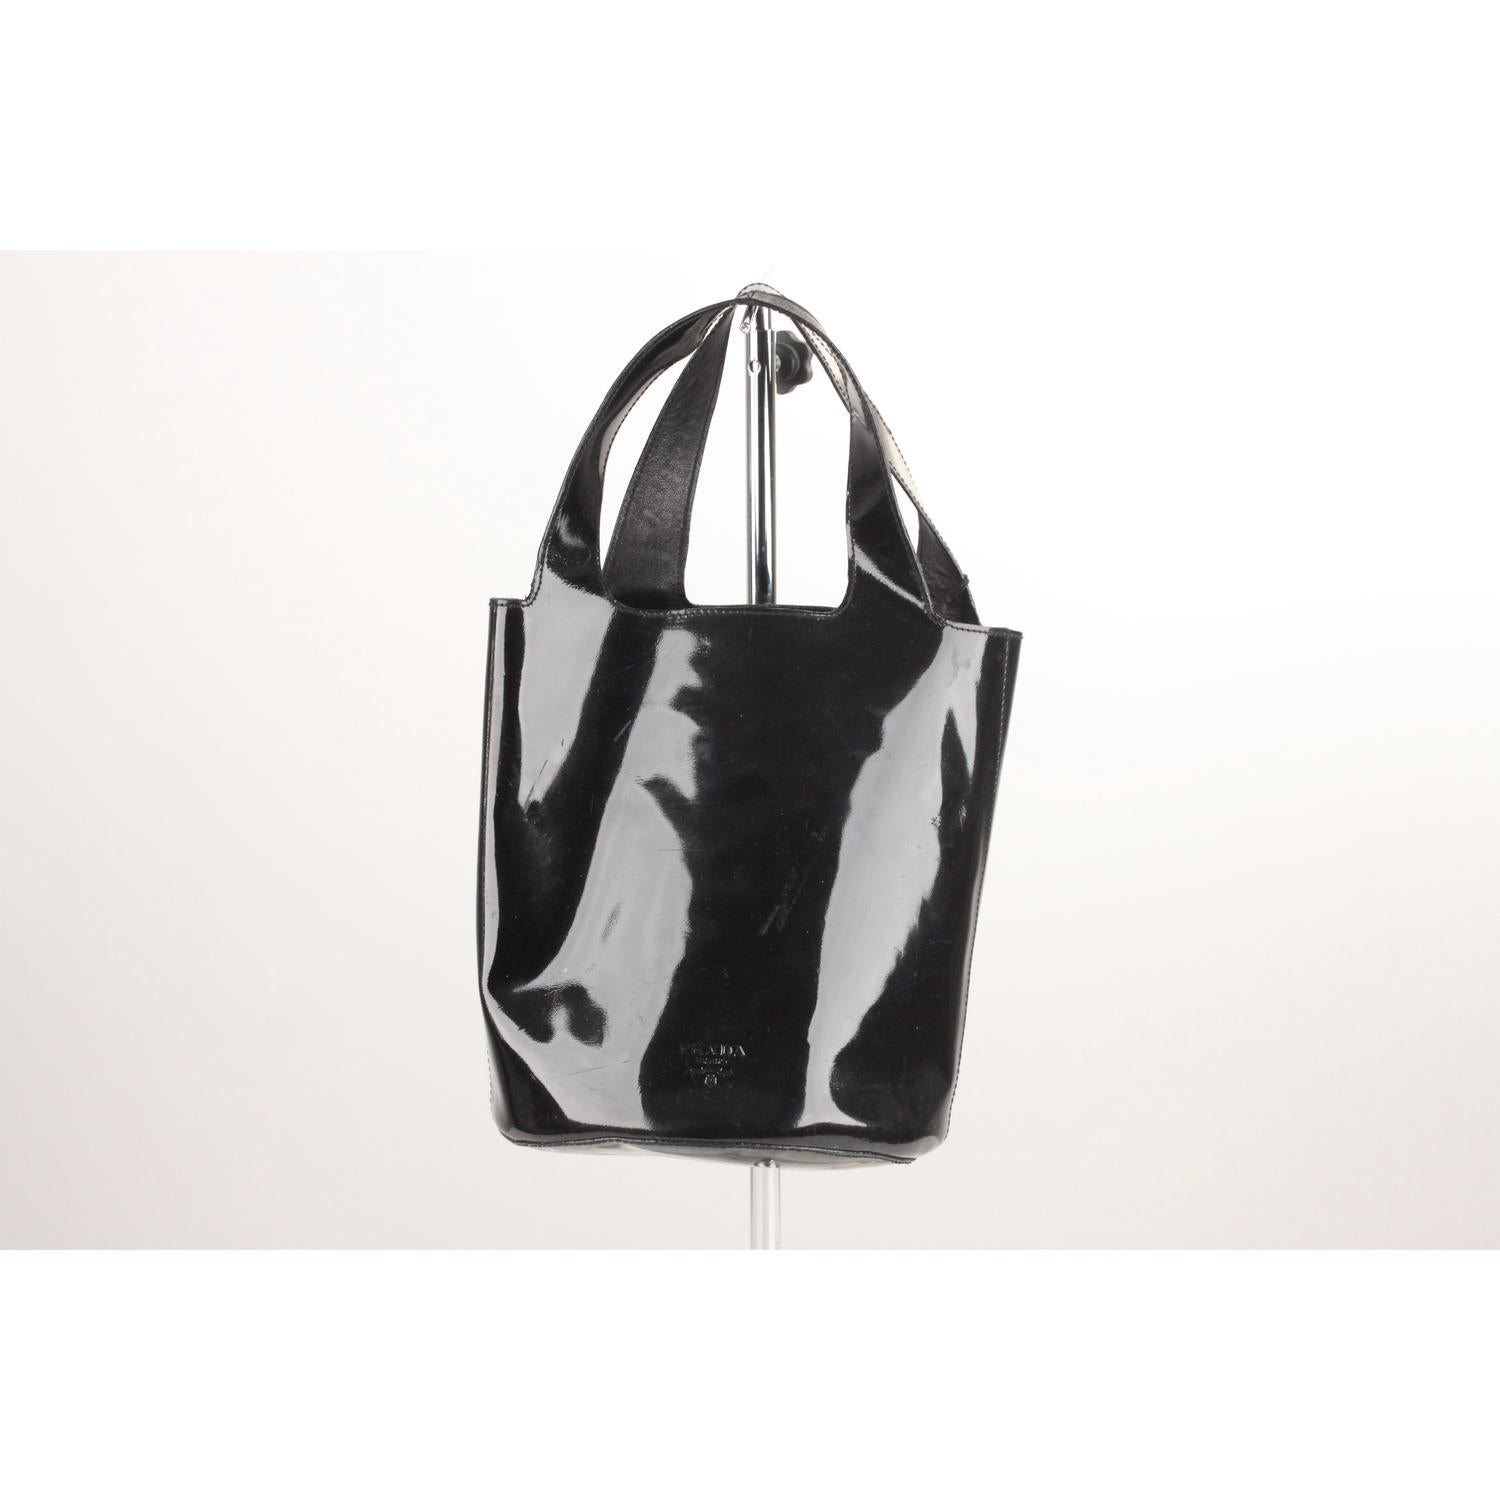 - PRADA Black patent leather bucket bag 
- 'PRADA Milano' engraved on leather tron the front
- Open top
- Black fabric lining 
- 1 side zip pocket
- Double top handles